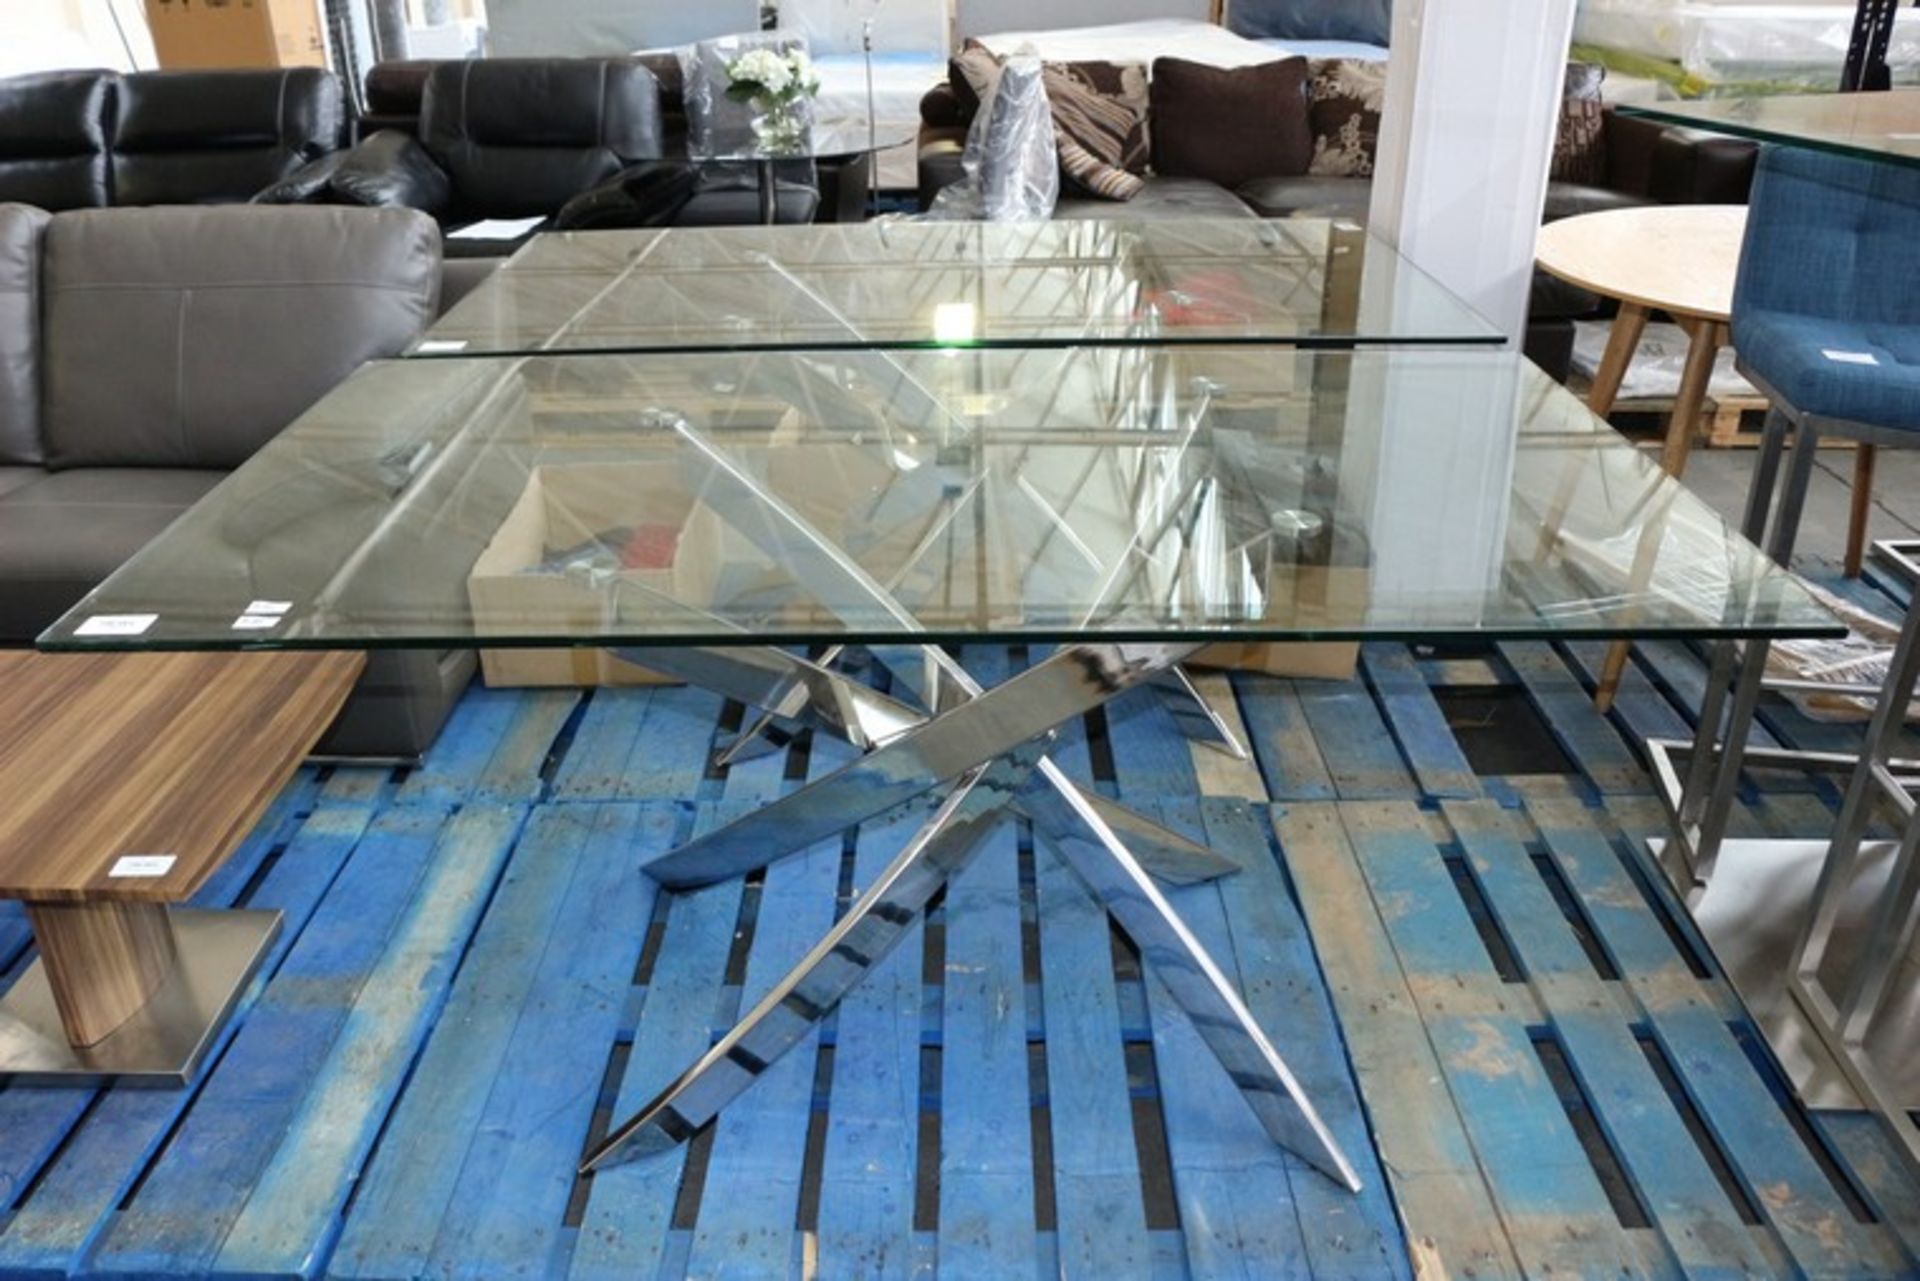 1 x CALMAR CLEAR GLASS AND STAINLESS STEEL RECTANGULAR DINING TABLE RRP £400 *PLEASE NOTE THAT THE